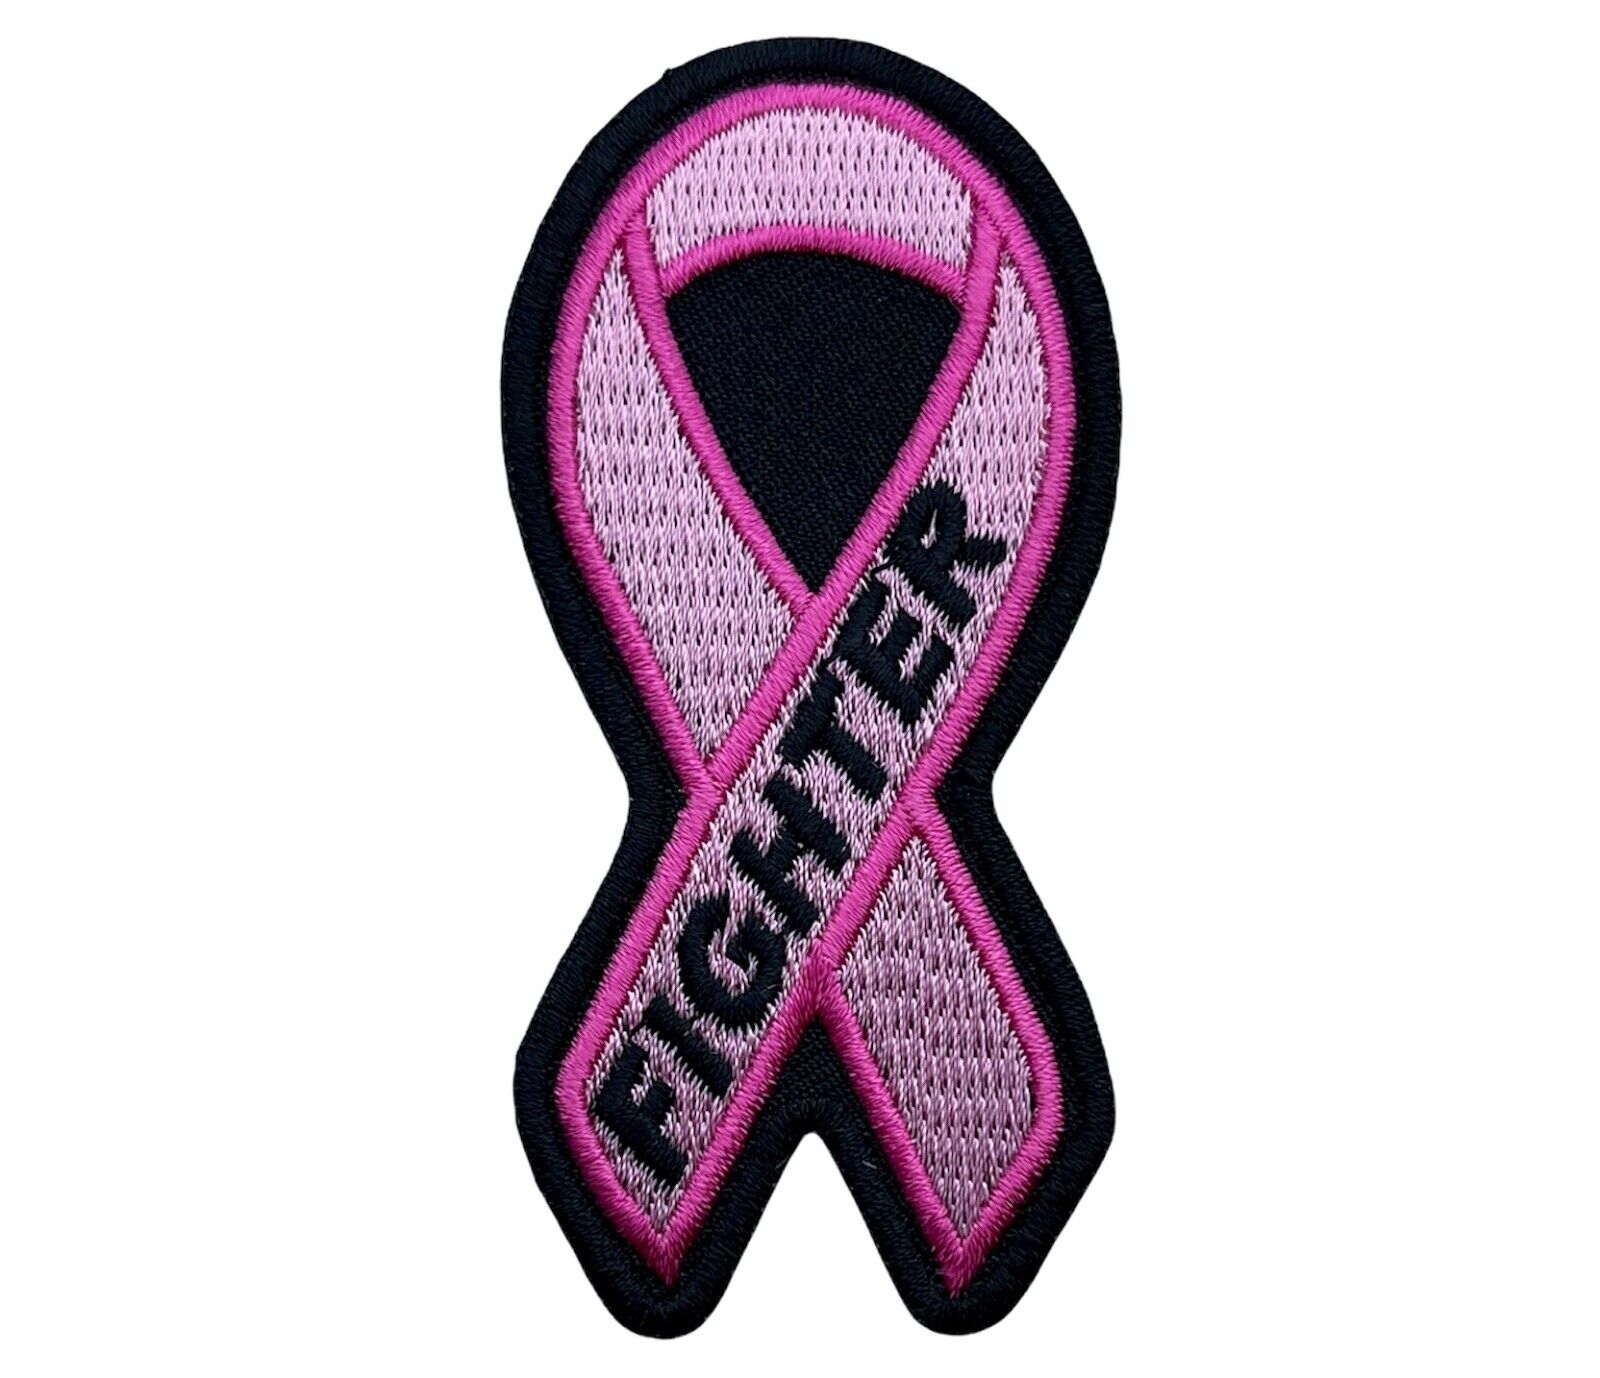 Cancer Fighter Pink Ribbon 3 Inch Embroidered Patch IV4767 F5D28U